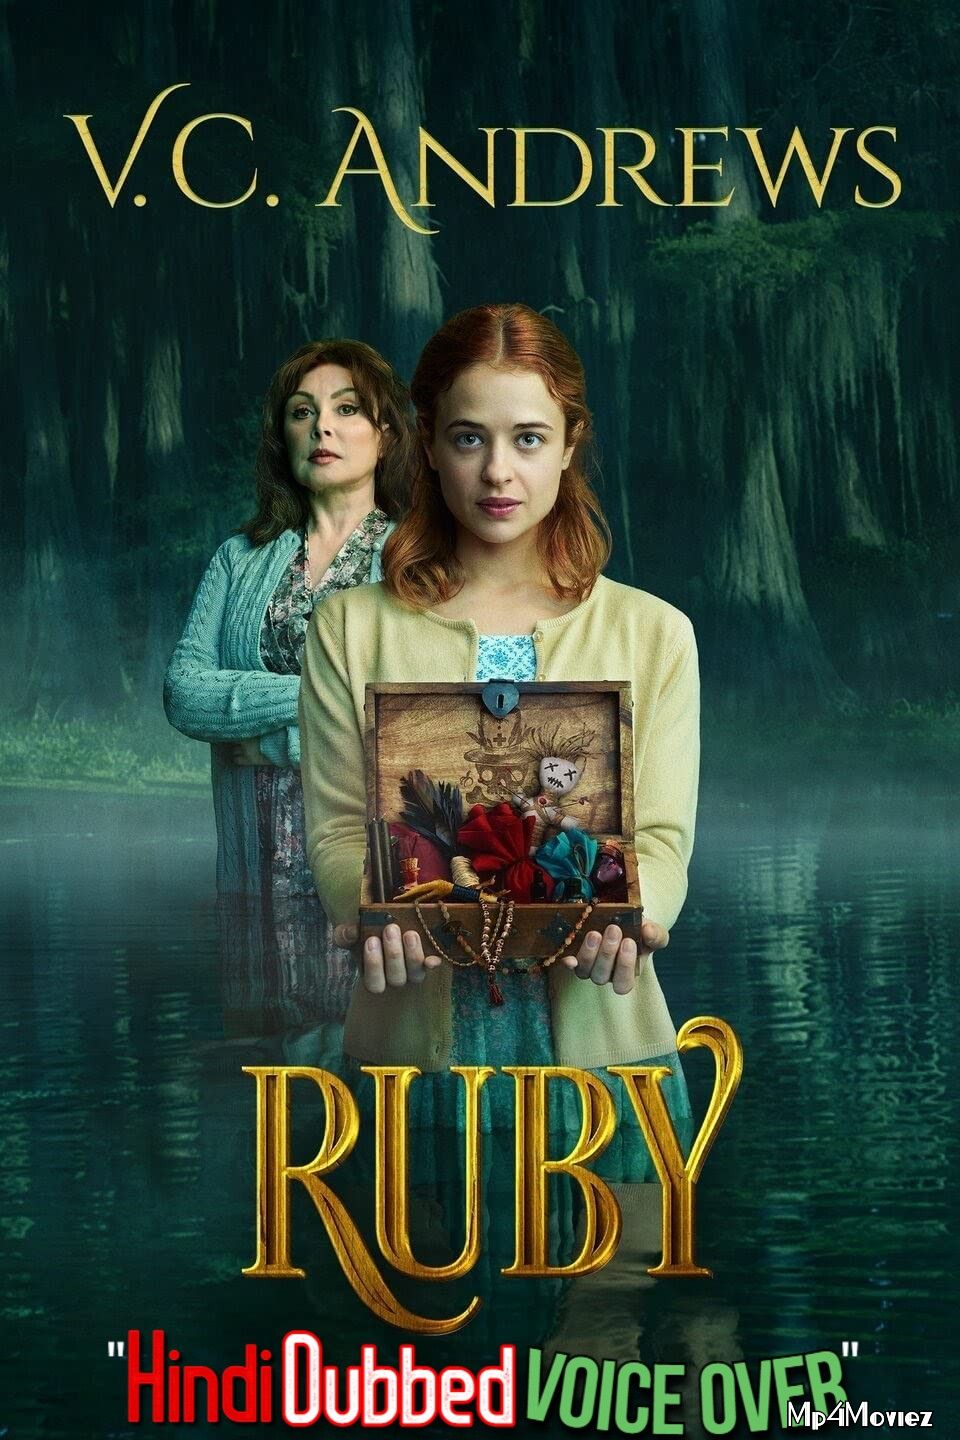 V.C. Andrews Ruby (2021) Hindi (Voice Over) Dubbed WEBRip download full movie